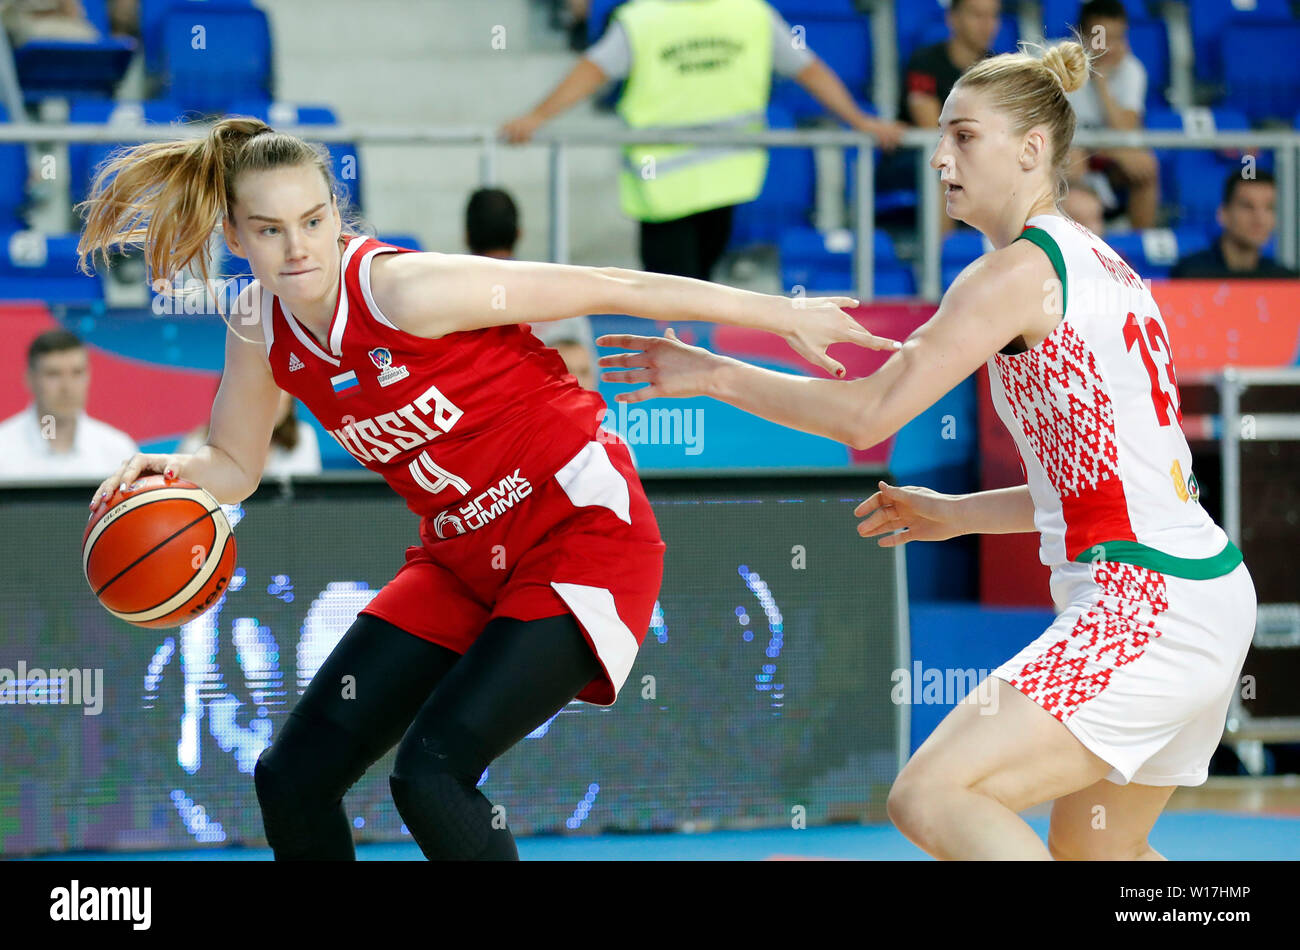 Zrenjanin, Serbia. 30th June, 2019. Raisa Musina (L) of Russia vies with  Maryia Papova of Belarus during a group match at the FIBA Women's  EuroBasket 2019 tournament basketball match in Zrenjanin, Serbia,